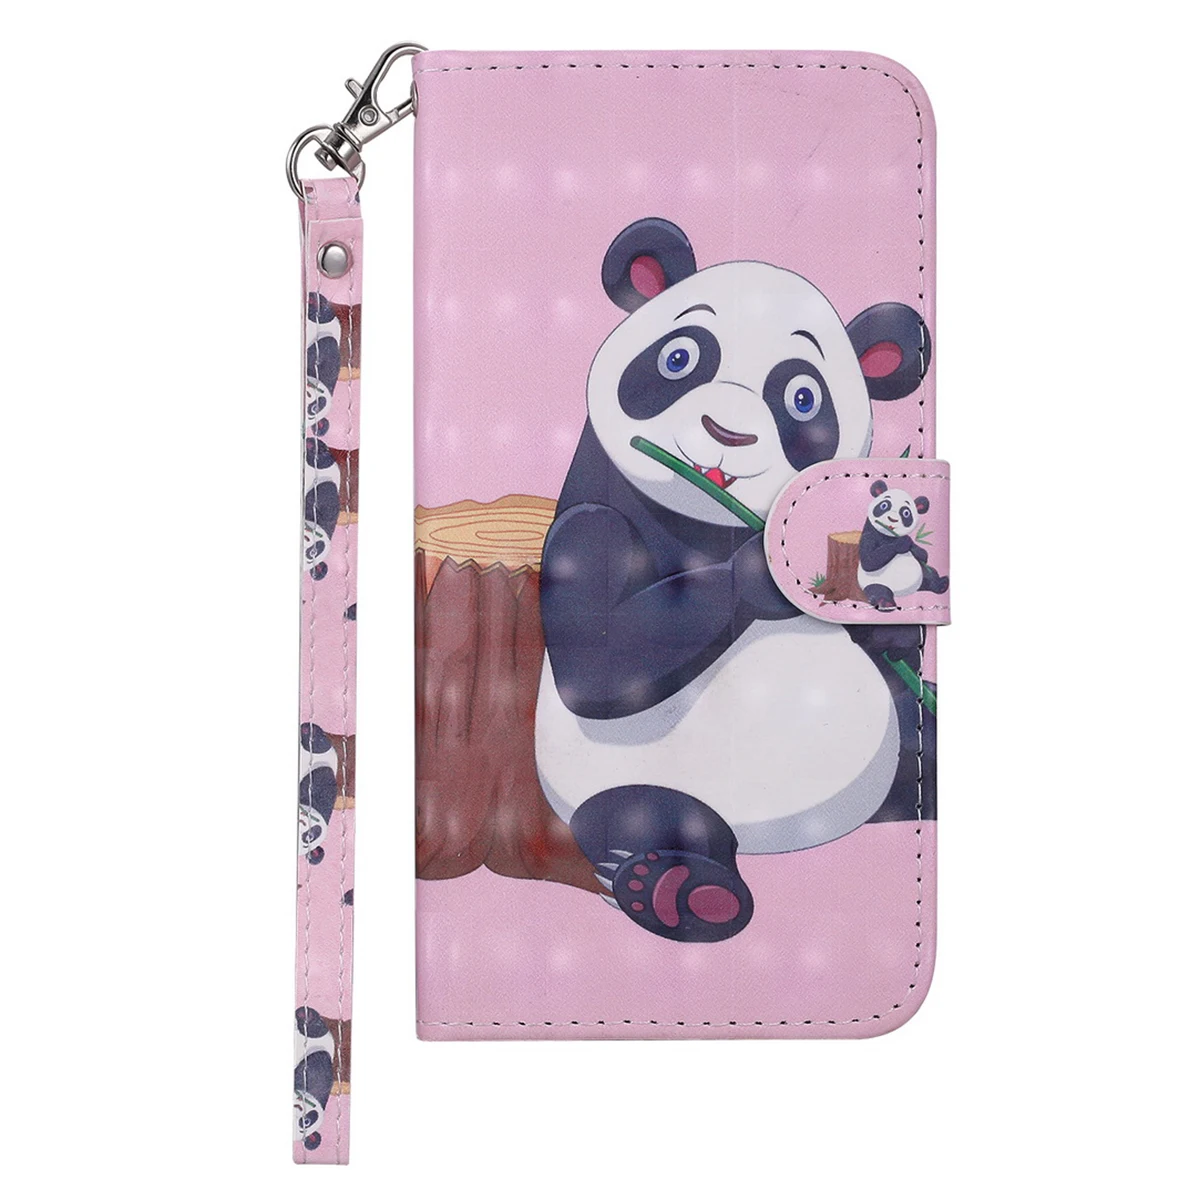 cute phone cases huawei Wallet Cover Huawei Honor 10 COL-L29A Leather Flip Case Huawei Honor10 COL-L29 COL-L29D Stand Cover 3D Painting Phone Bag Funda cute phone cases huawei Cases For Huawei